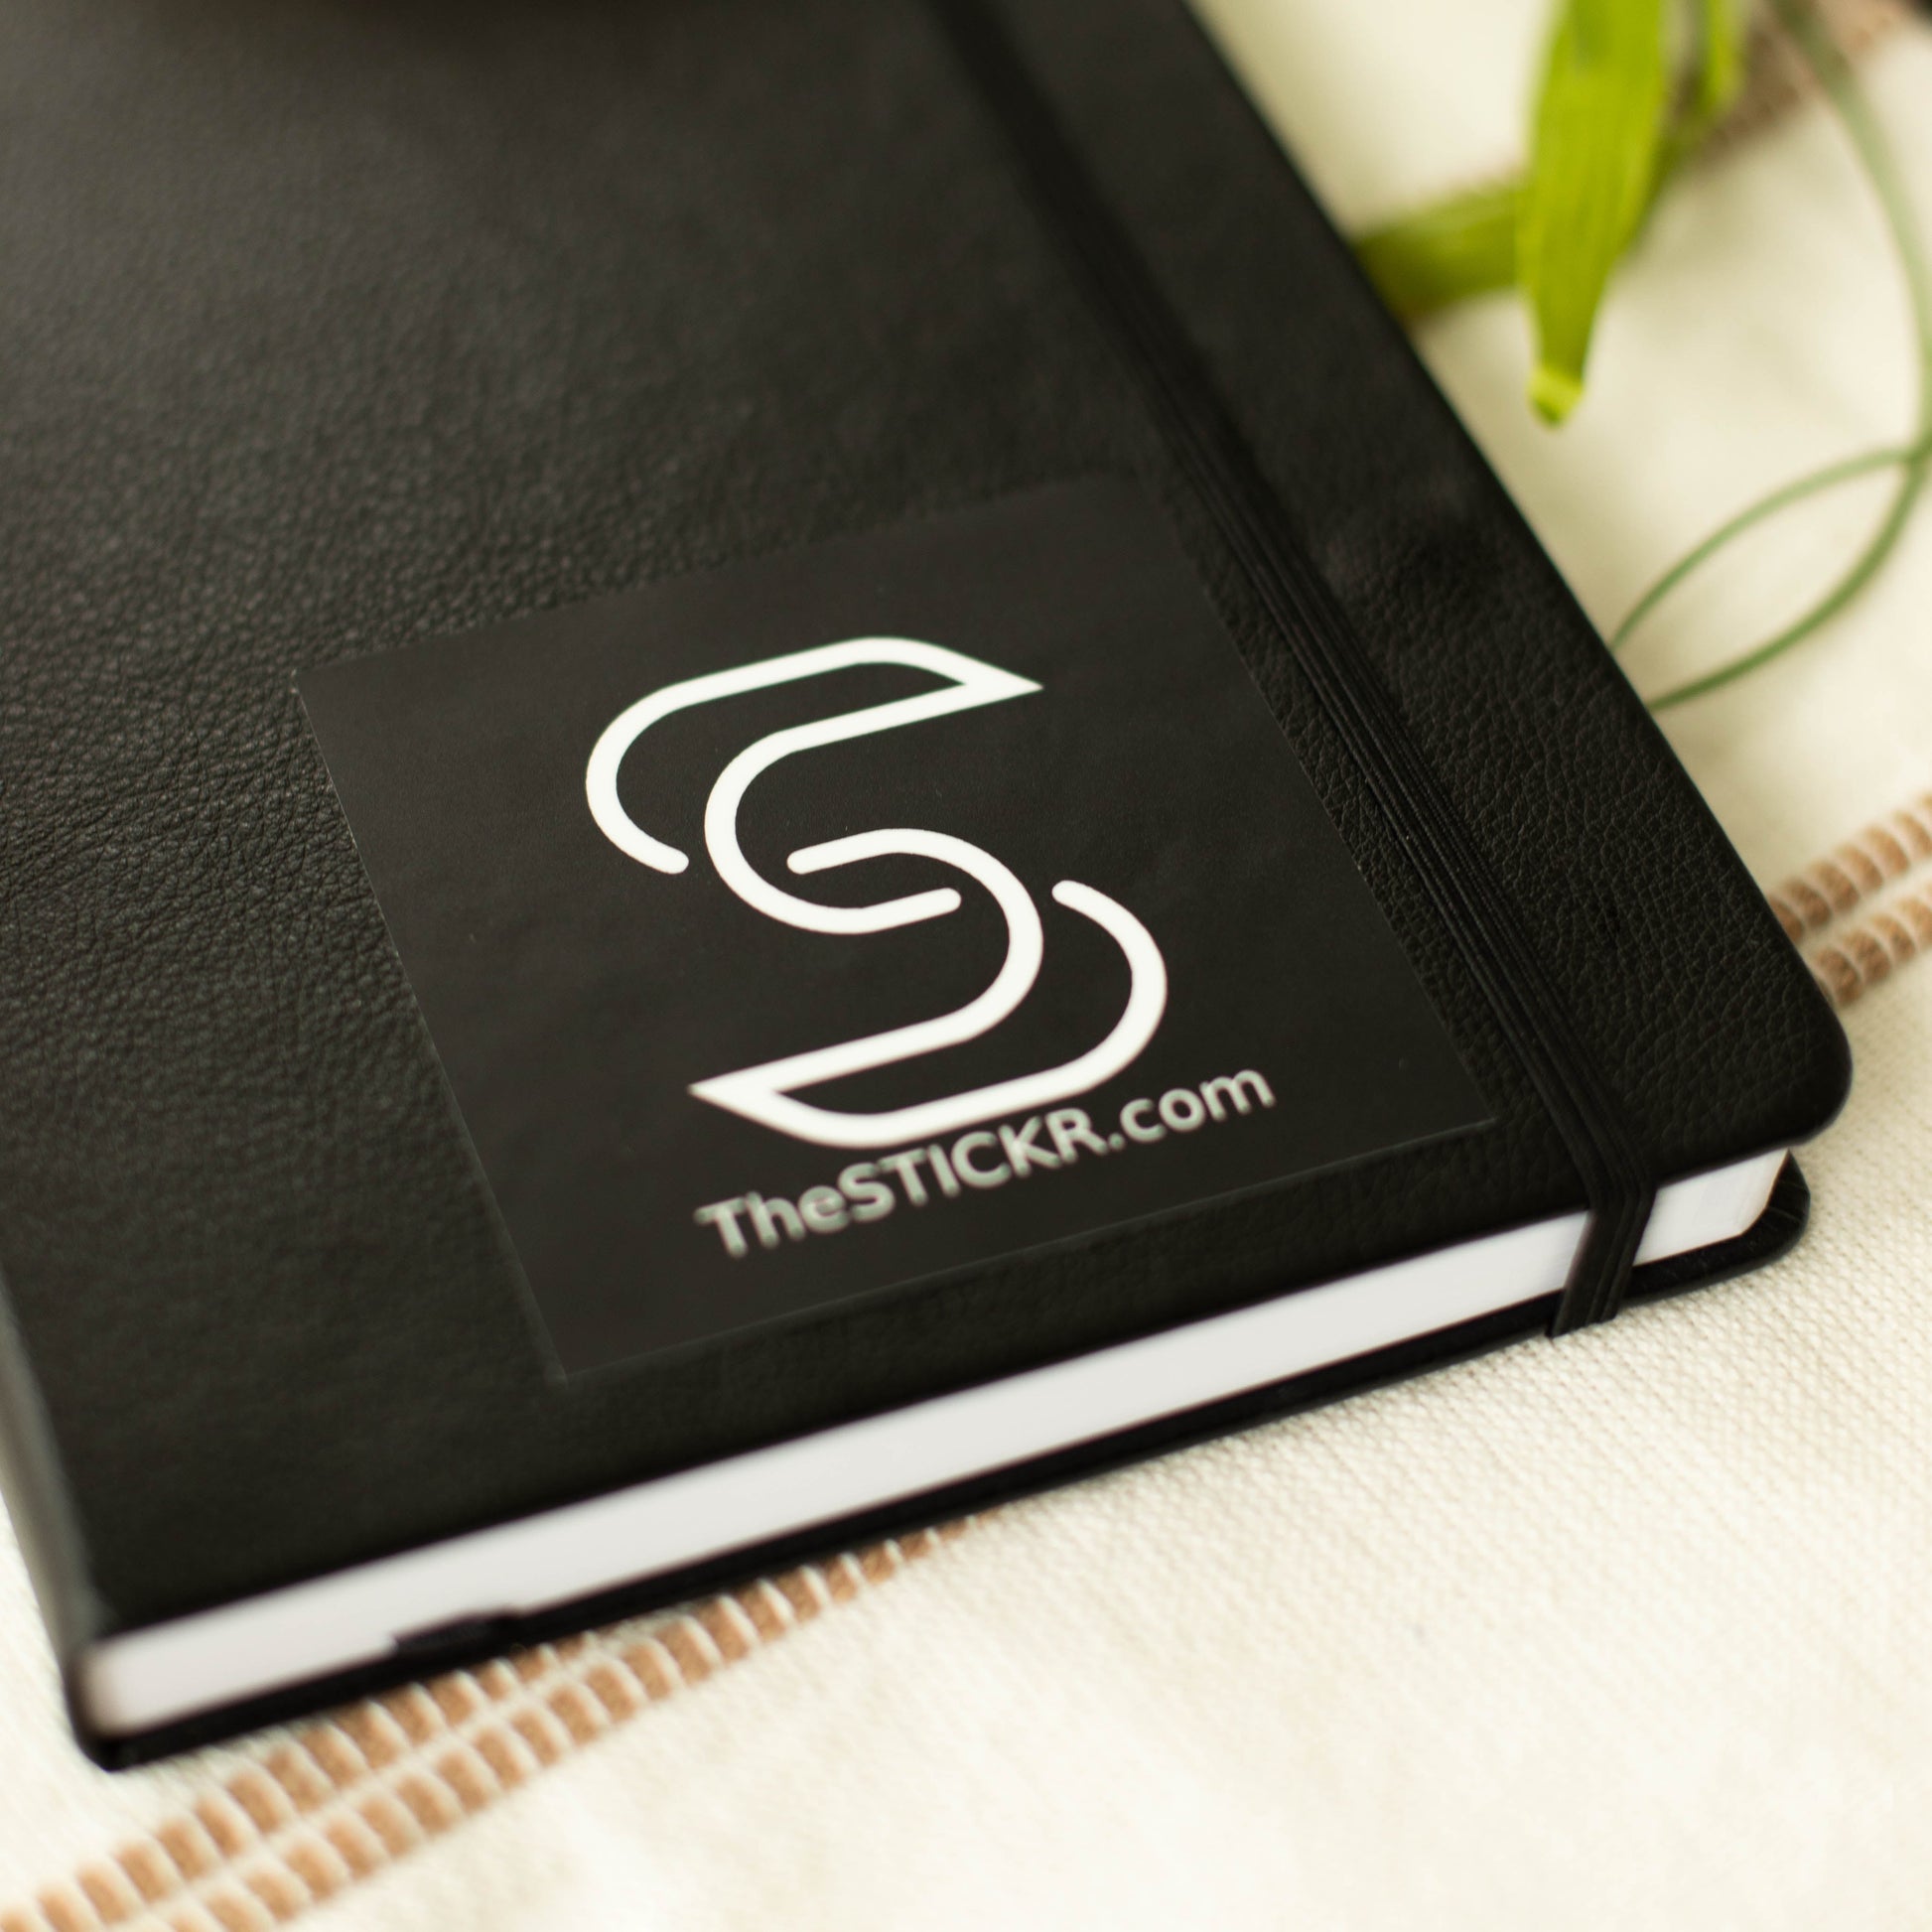 A square-shaped black vinyl sticker of the Stickr logo and website on a notebook